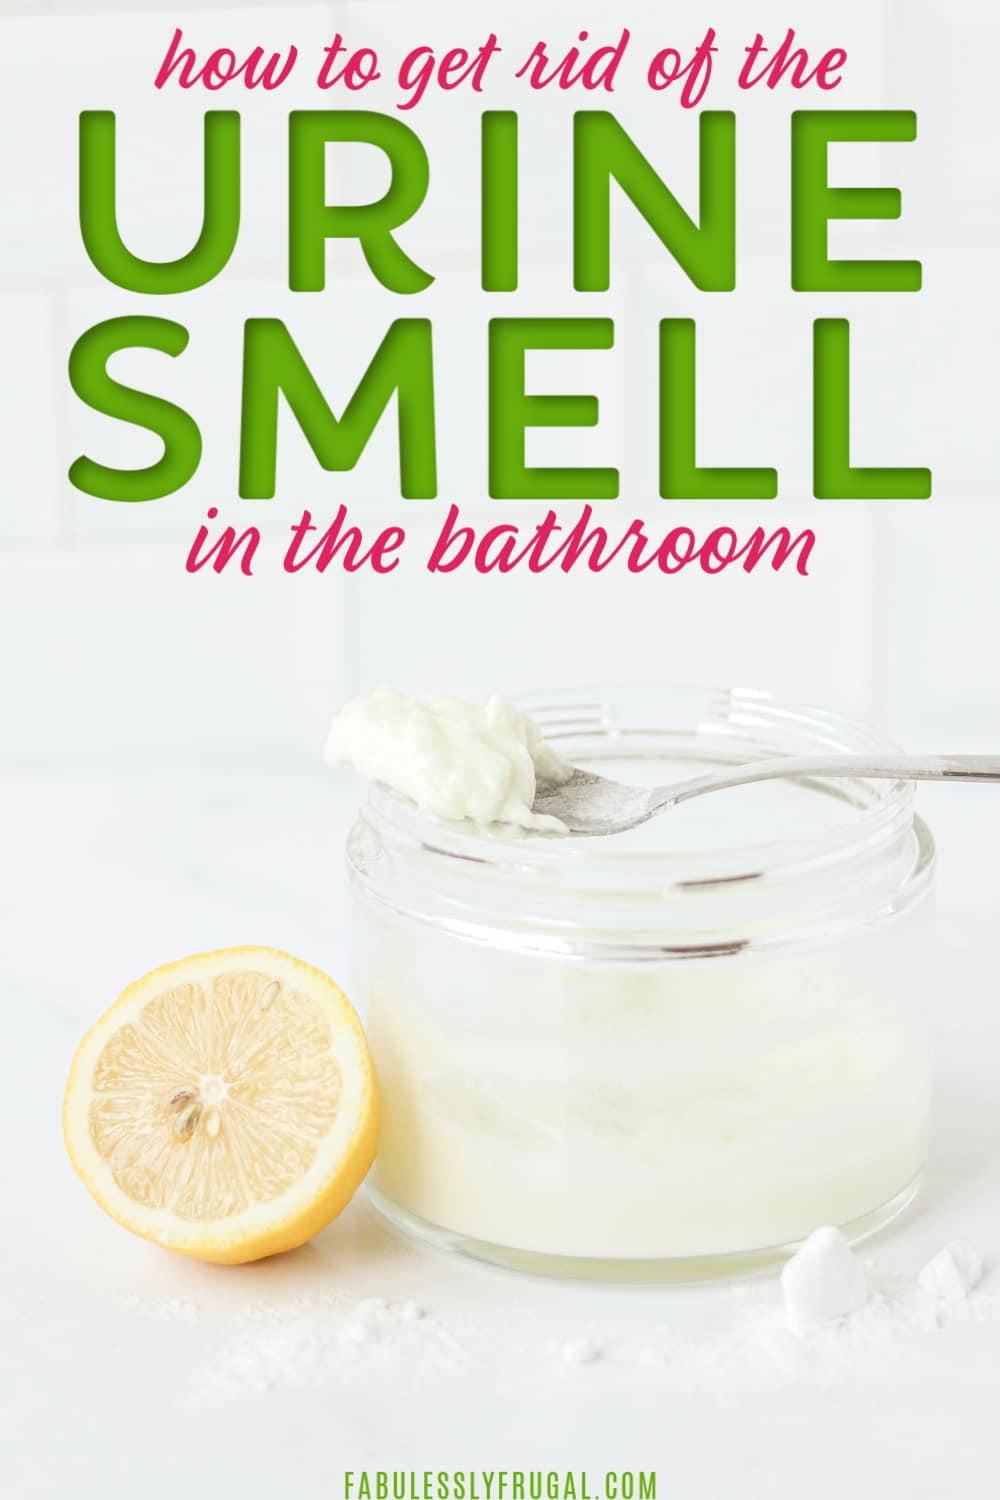 How to get rid of toilet odor